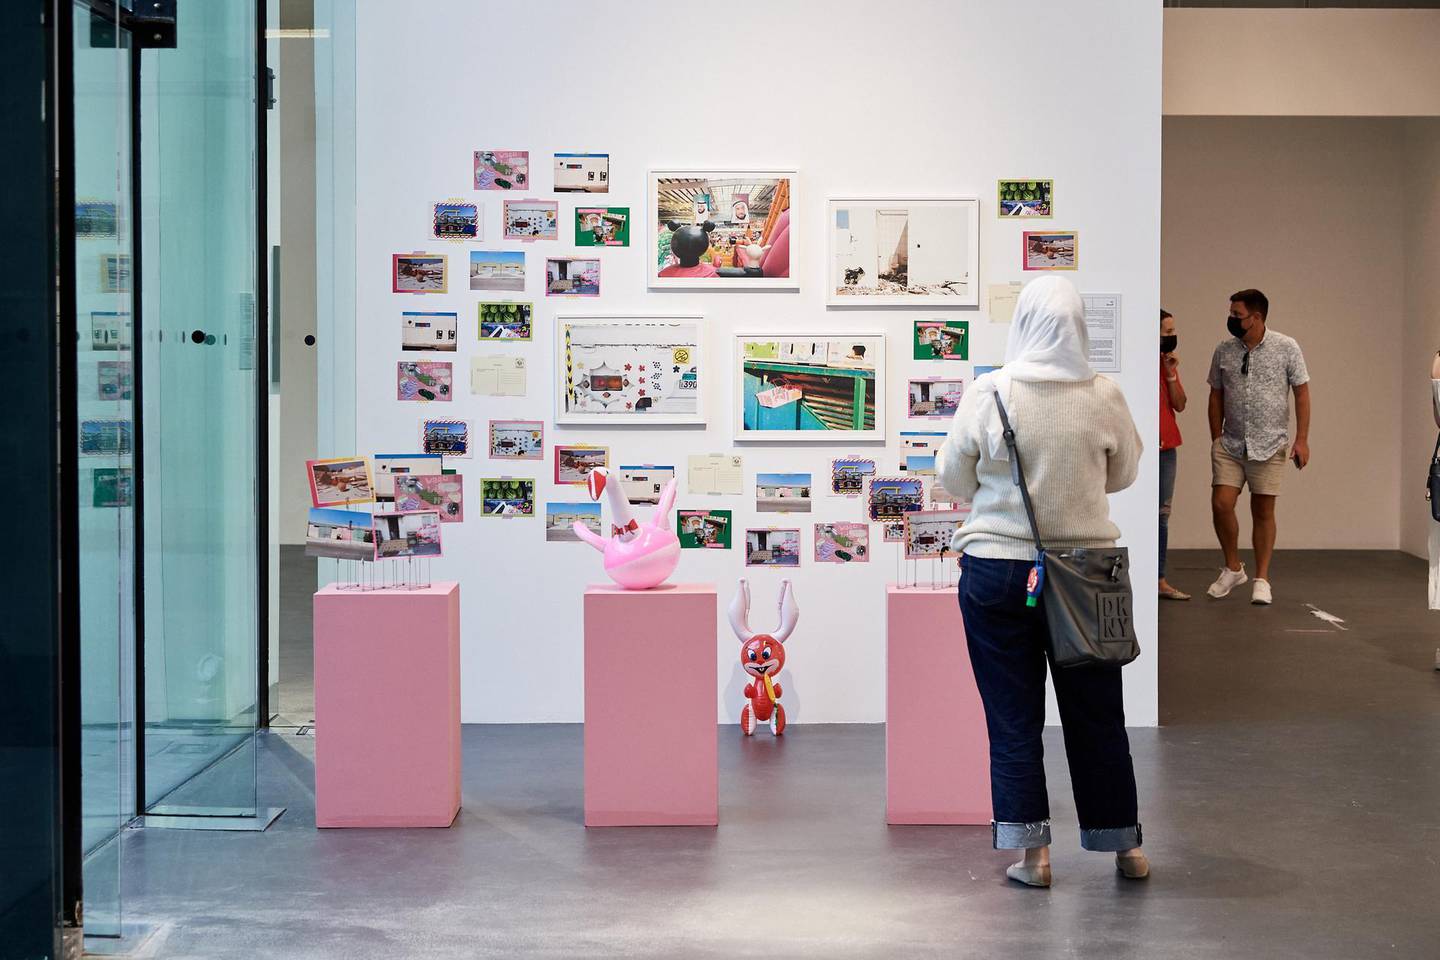 In 'Postcards from Mina Zayed', Lena Kassicieh examines place-making through bright, colourful postcards of Mina Zayed. Warehouse421